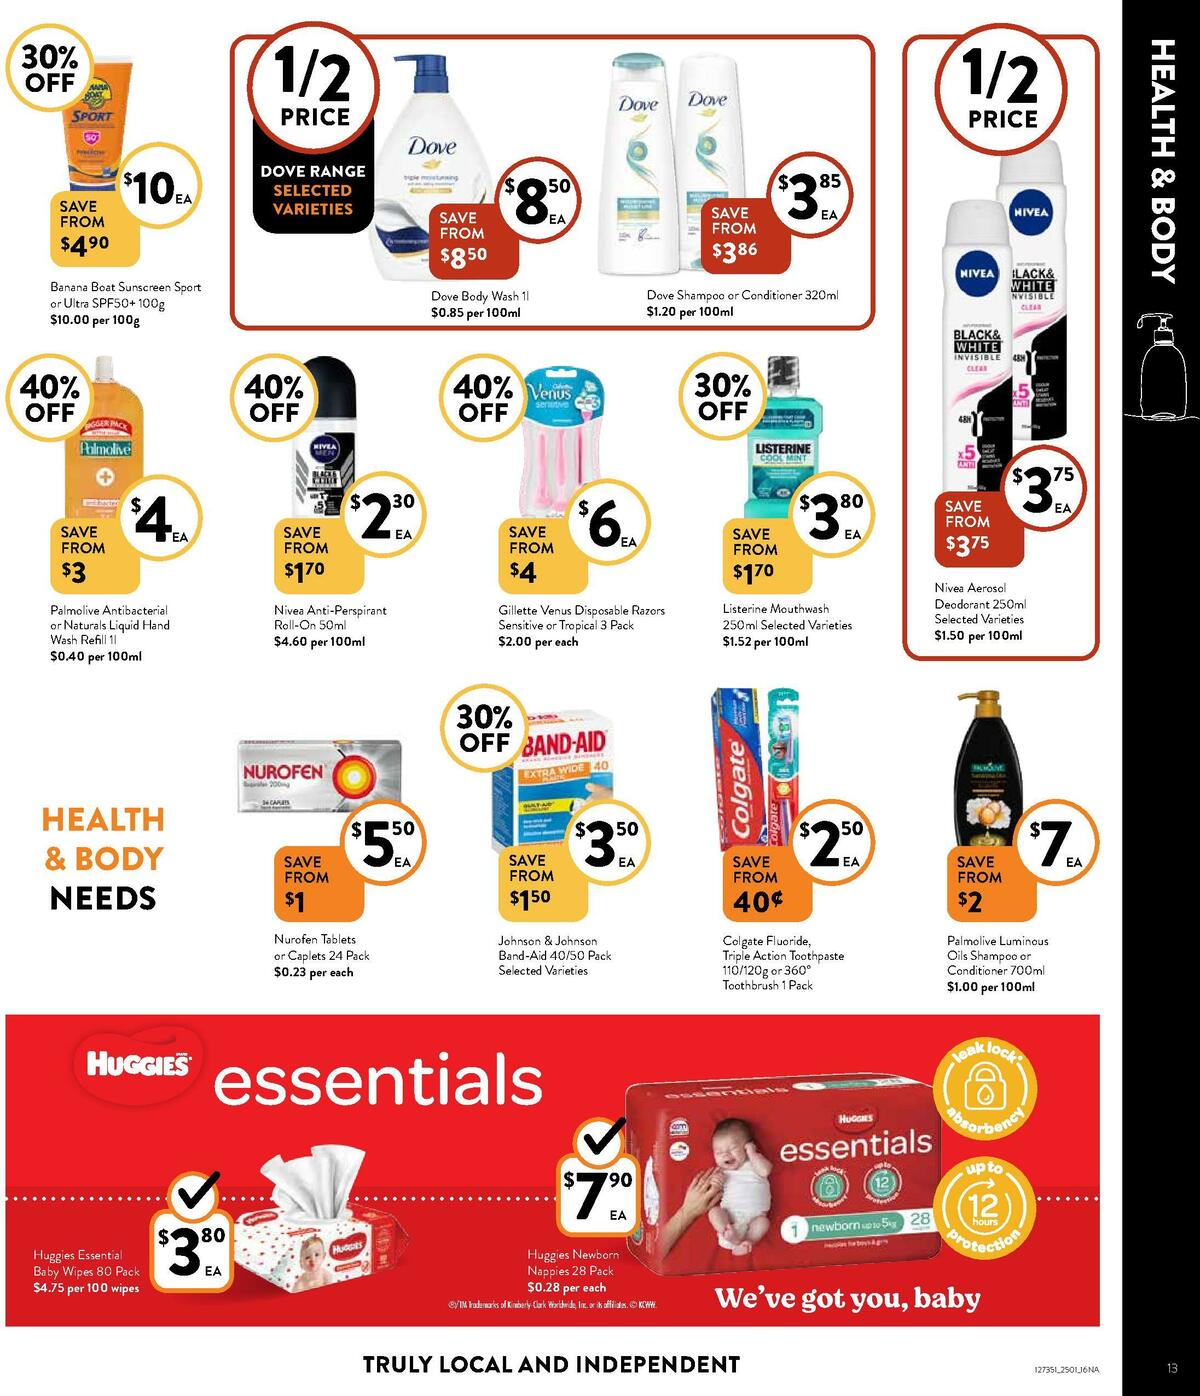 FoodWorks Supermarket Catalogues from 25 January